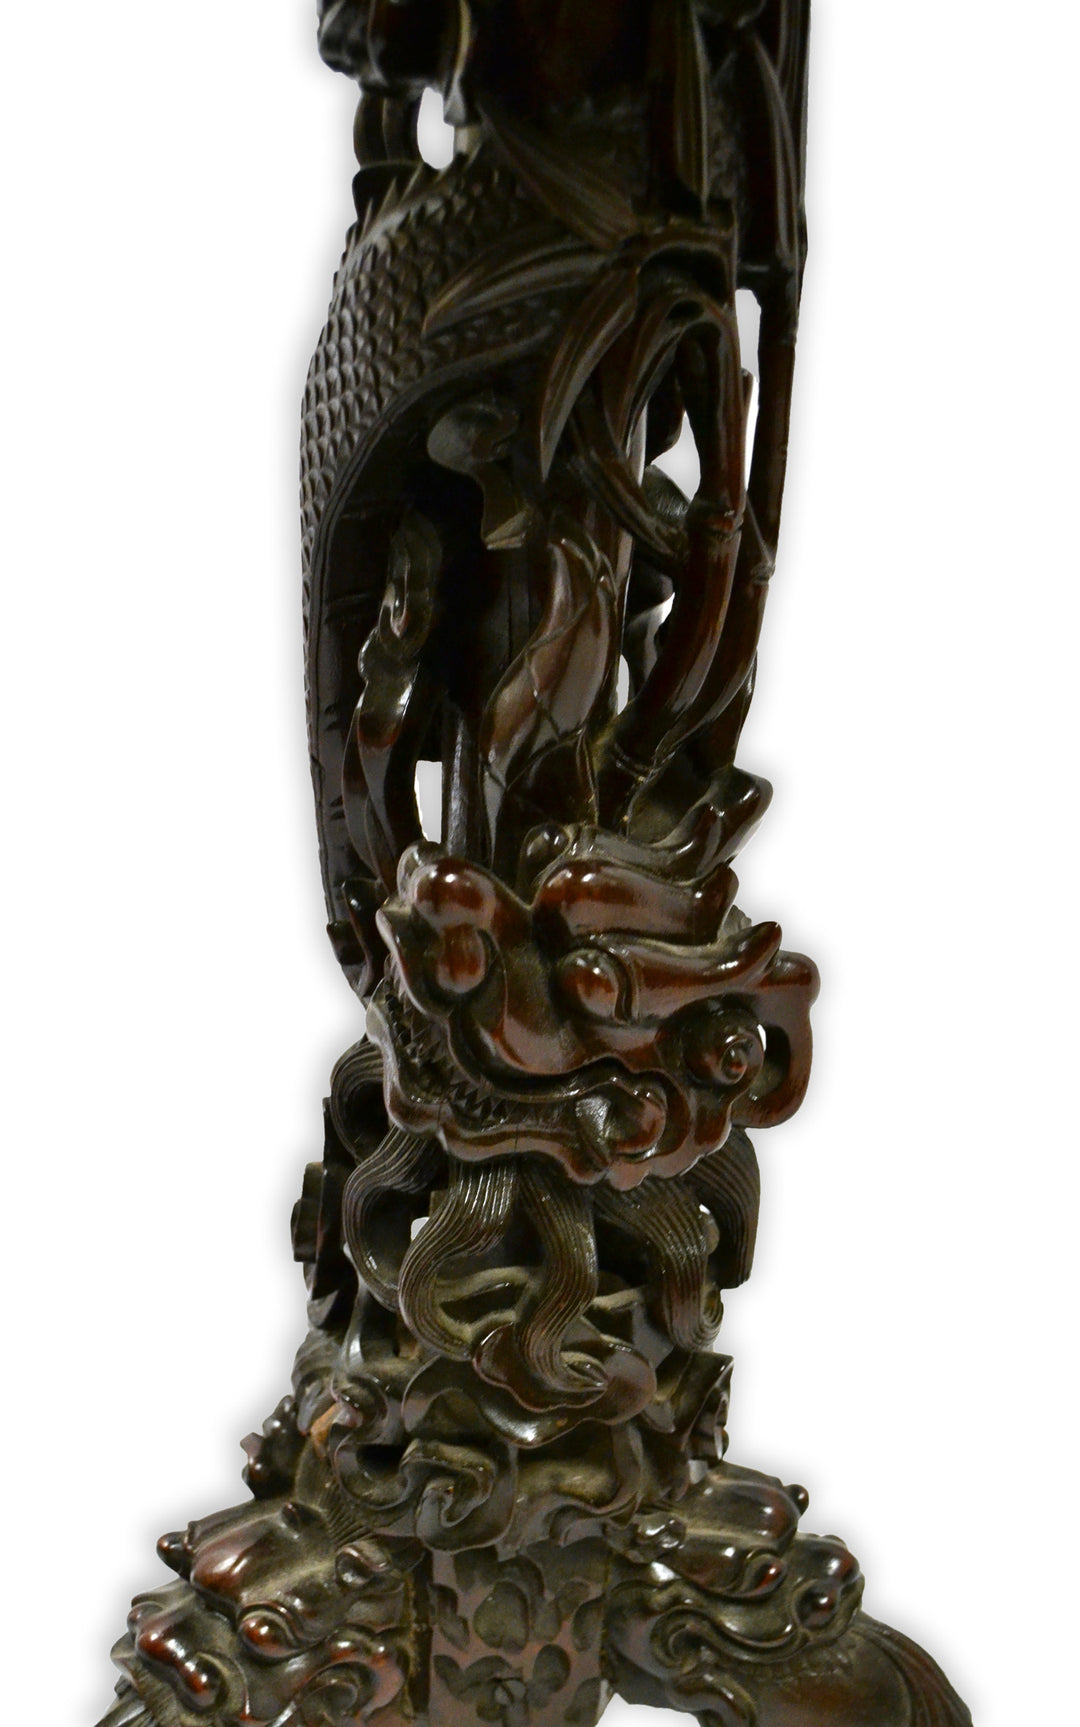 Elaborately Carved Qing Dragon Table with Marble Top